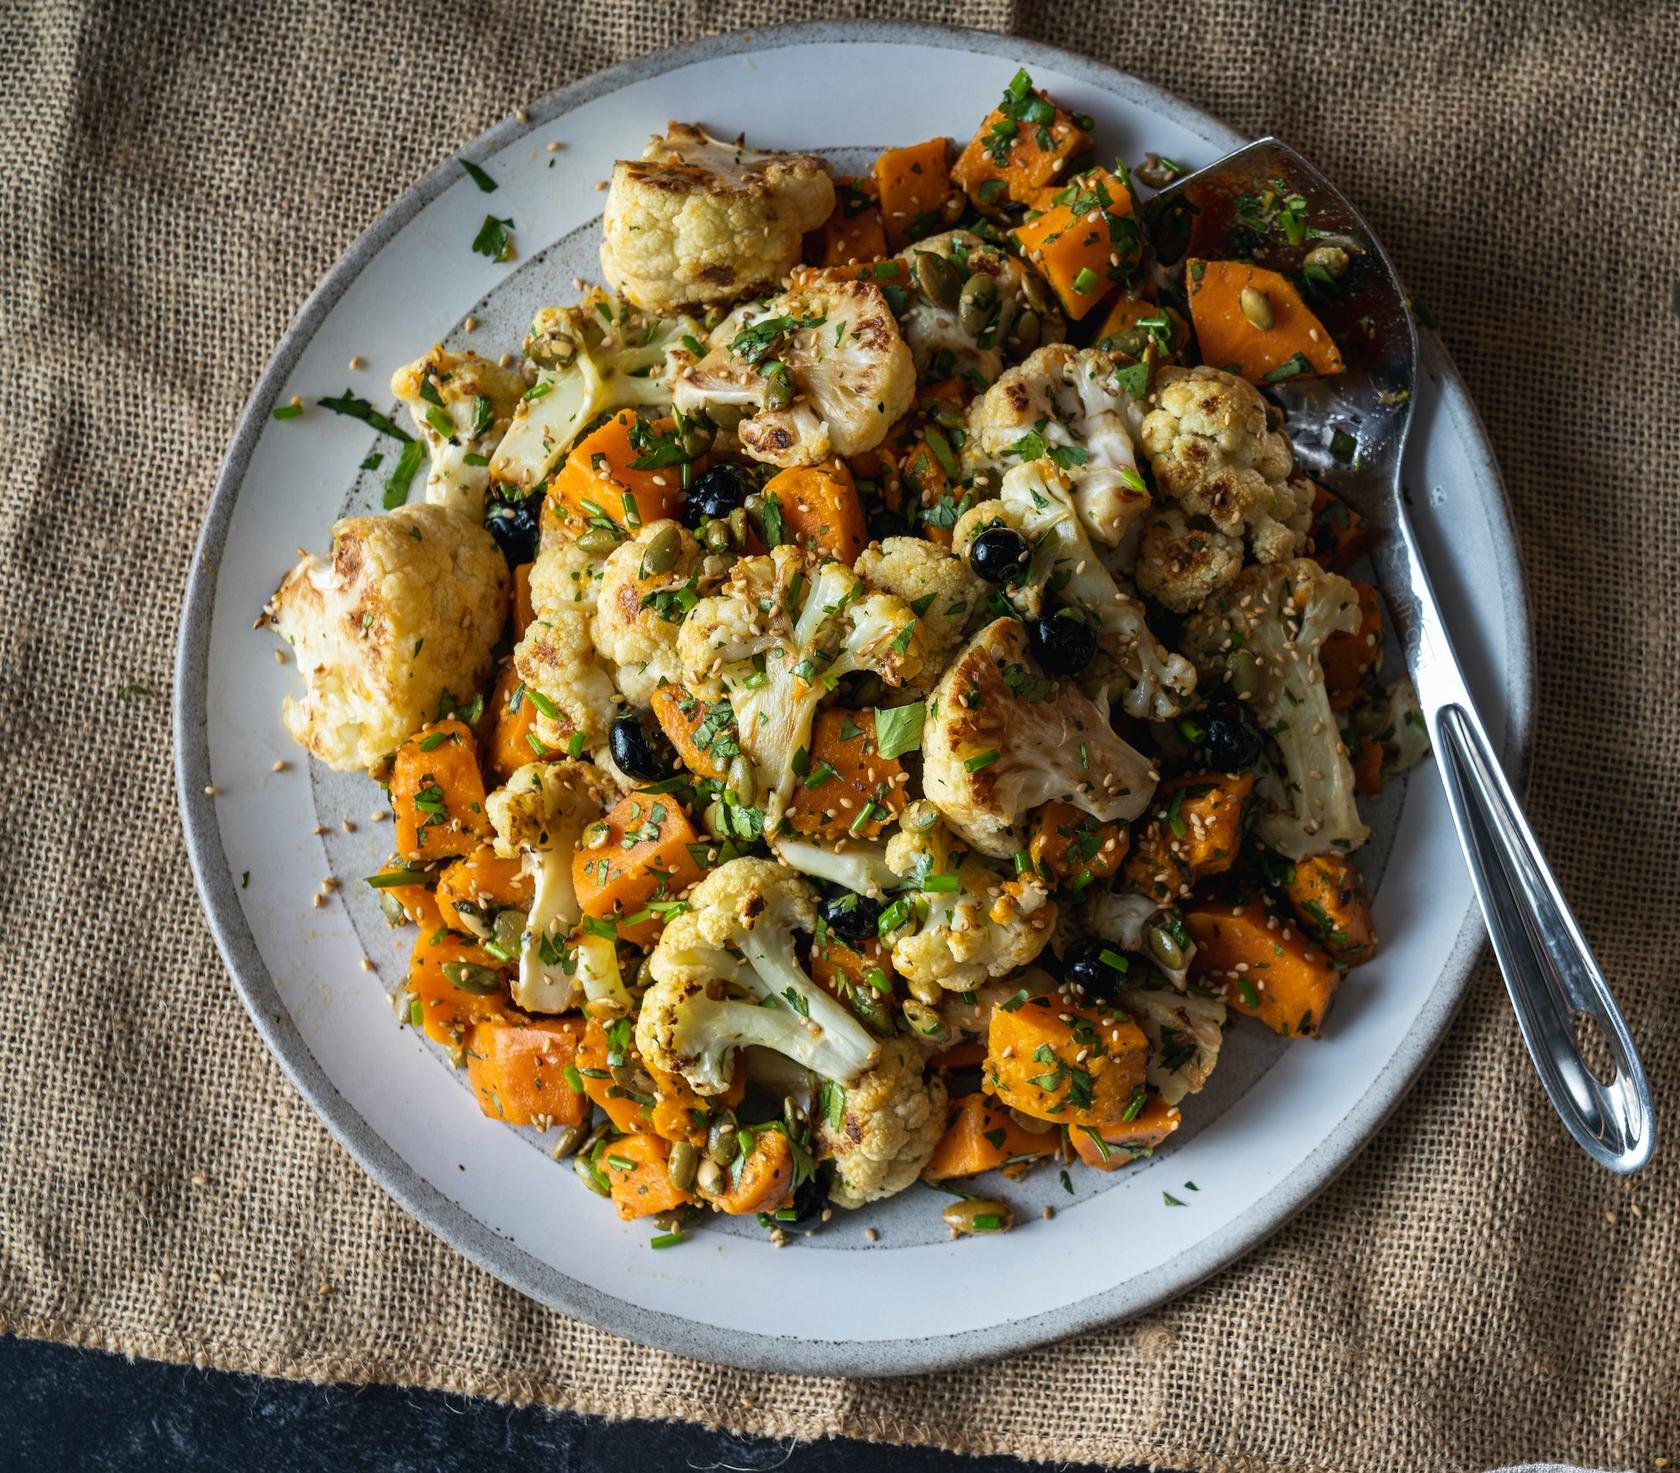 Blistered Cauliflower Salad with Smoked Sweet Potatoes and Pumpkin Seeds